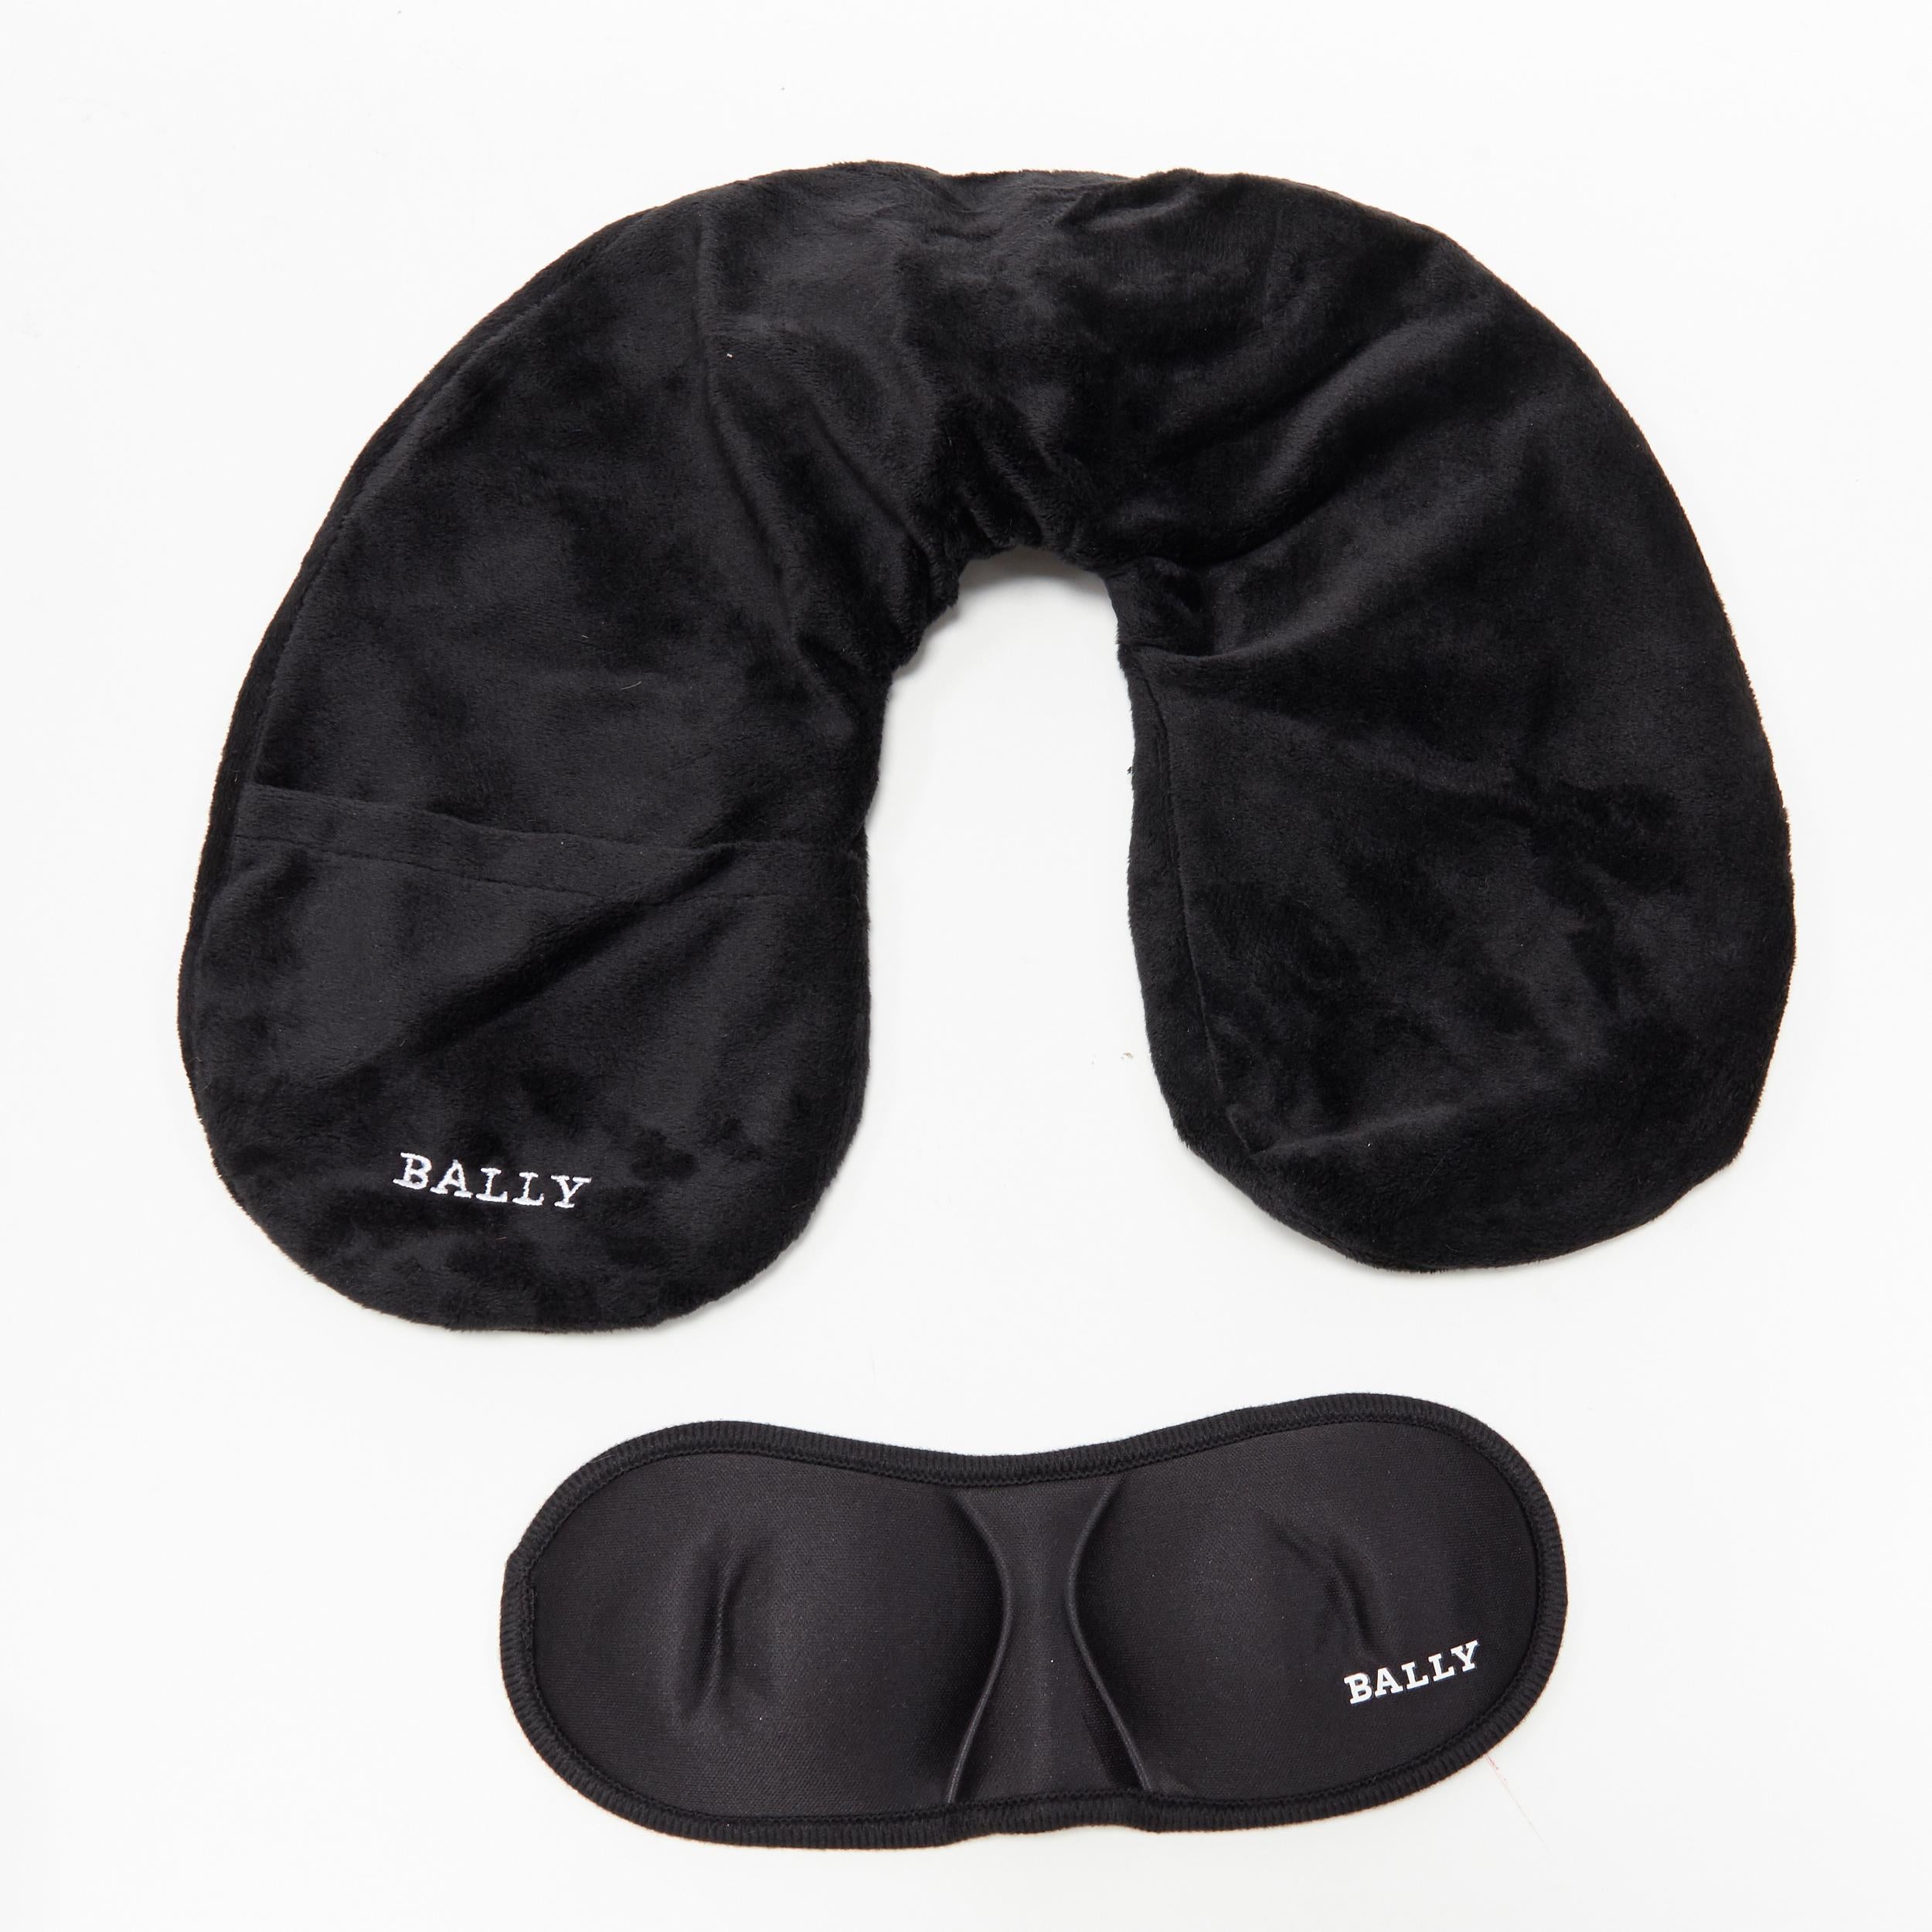 new BALLY Signature web canvas pouch eye mask neck pillow travel flight set
Brand: Bally
Model Name / Style: Travel set
Material: Fabric
Color: Black
Pattern: Solid
Closure: Zip
Extra Detail: Mask and inflatable neck pillow travel set.

CONDITION: